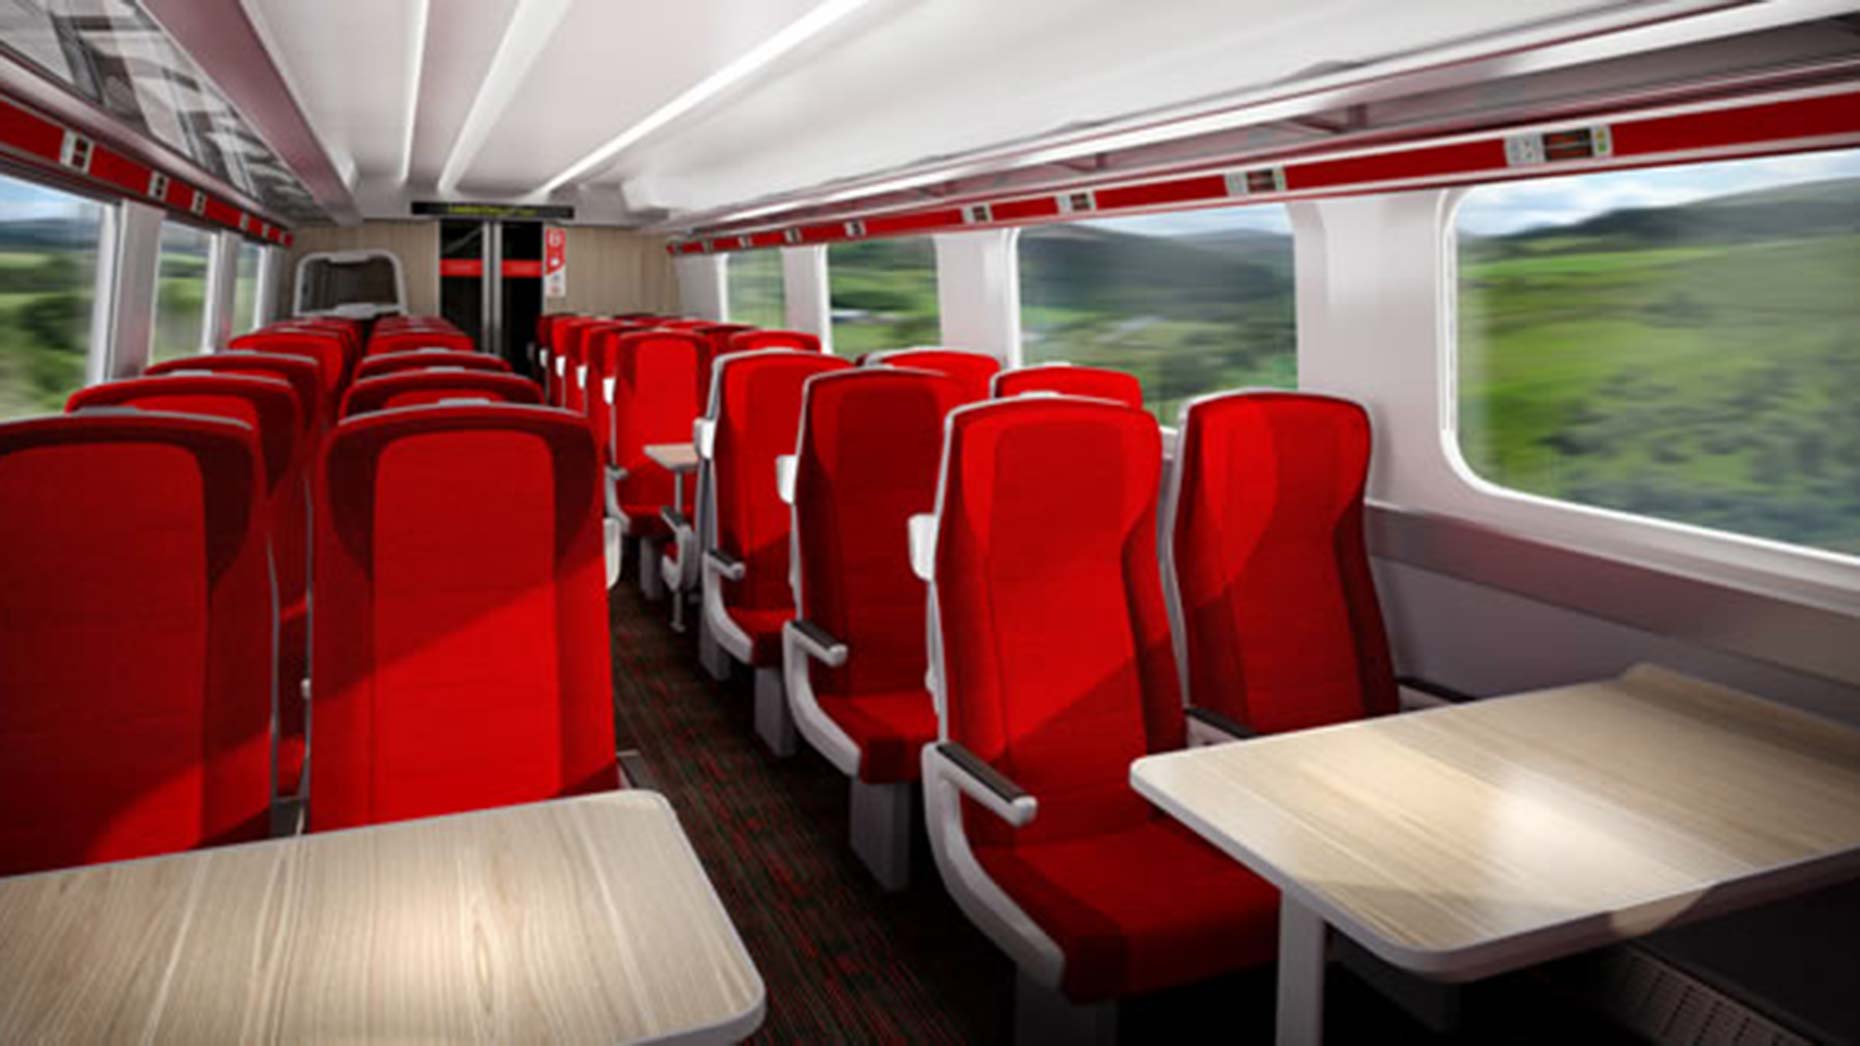 Artist impression of Standard class in the upcoming Virgin Azuma trains